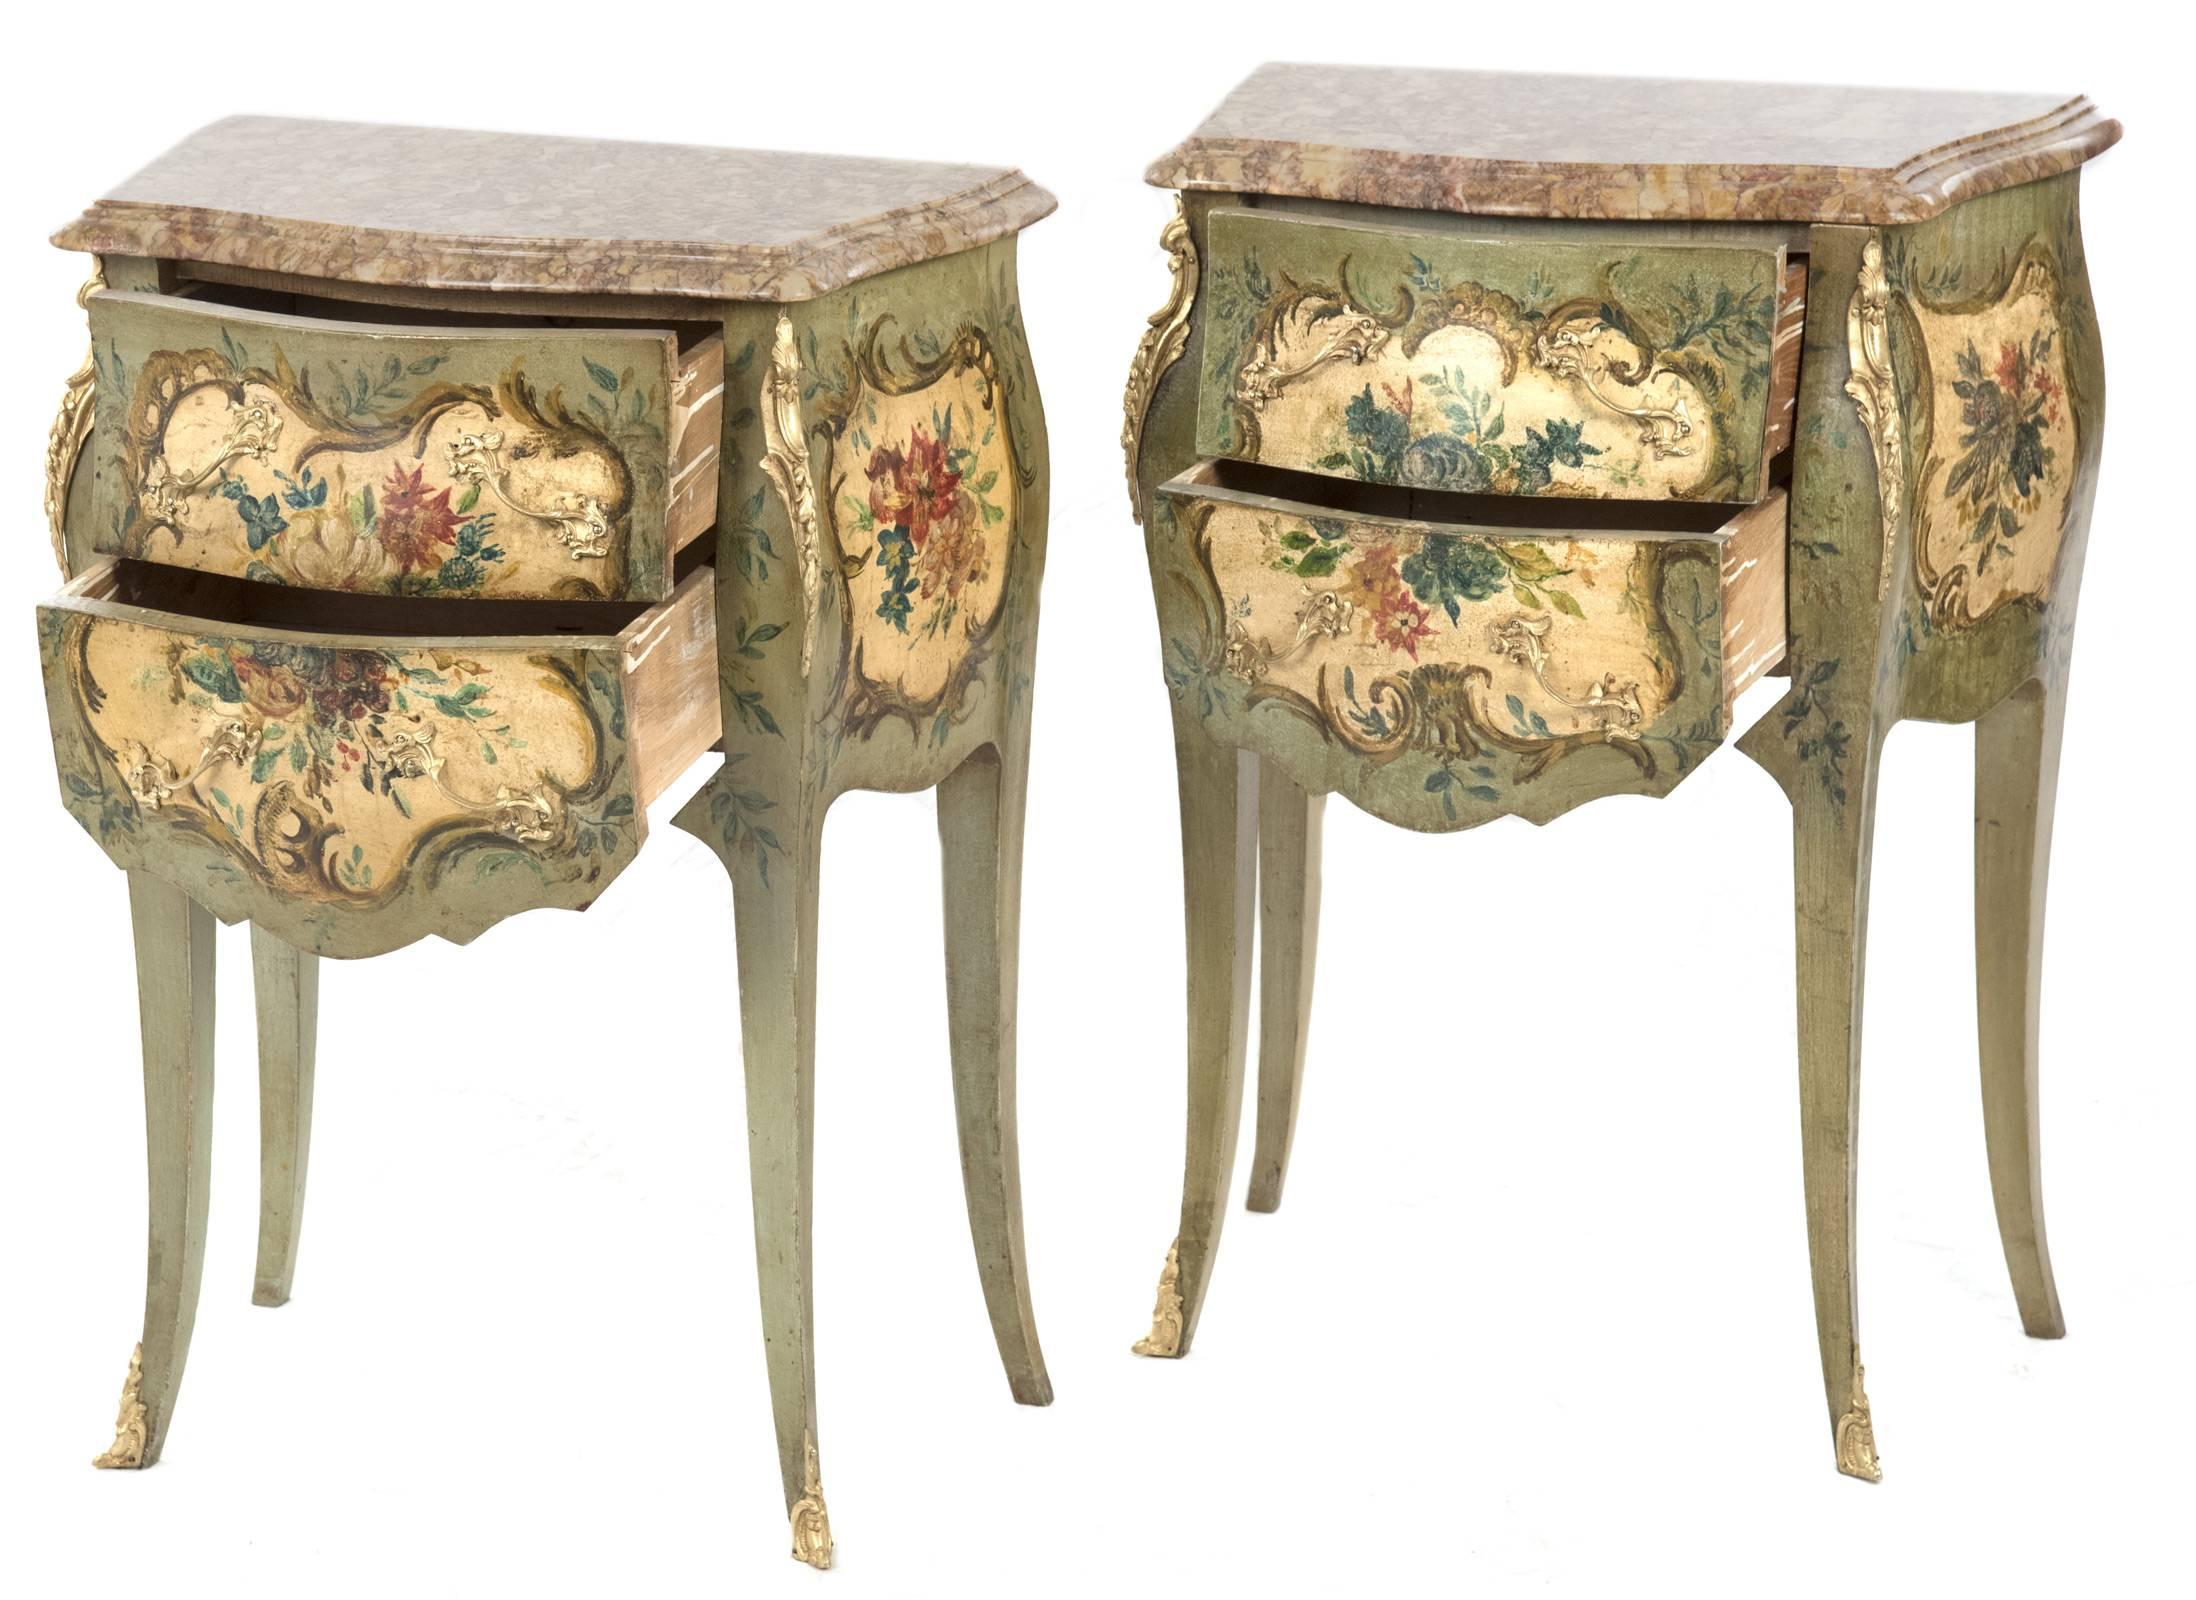 Rococo Revival French, Louis XVI Style Painted and Marble-Topped Nightstands